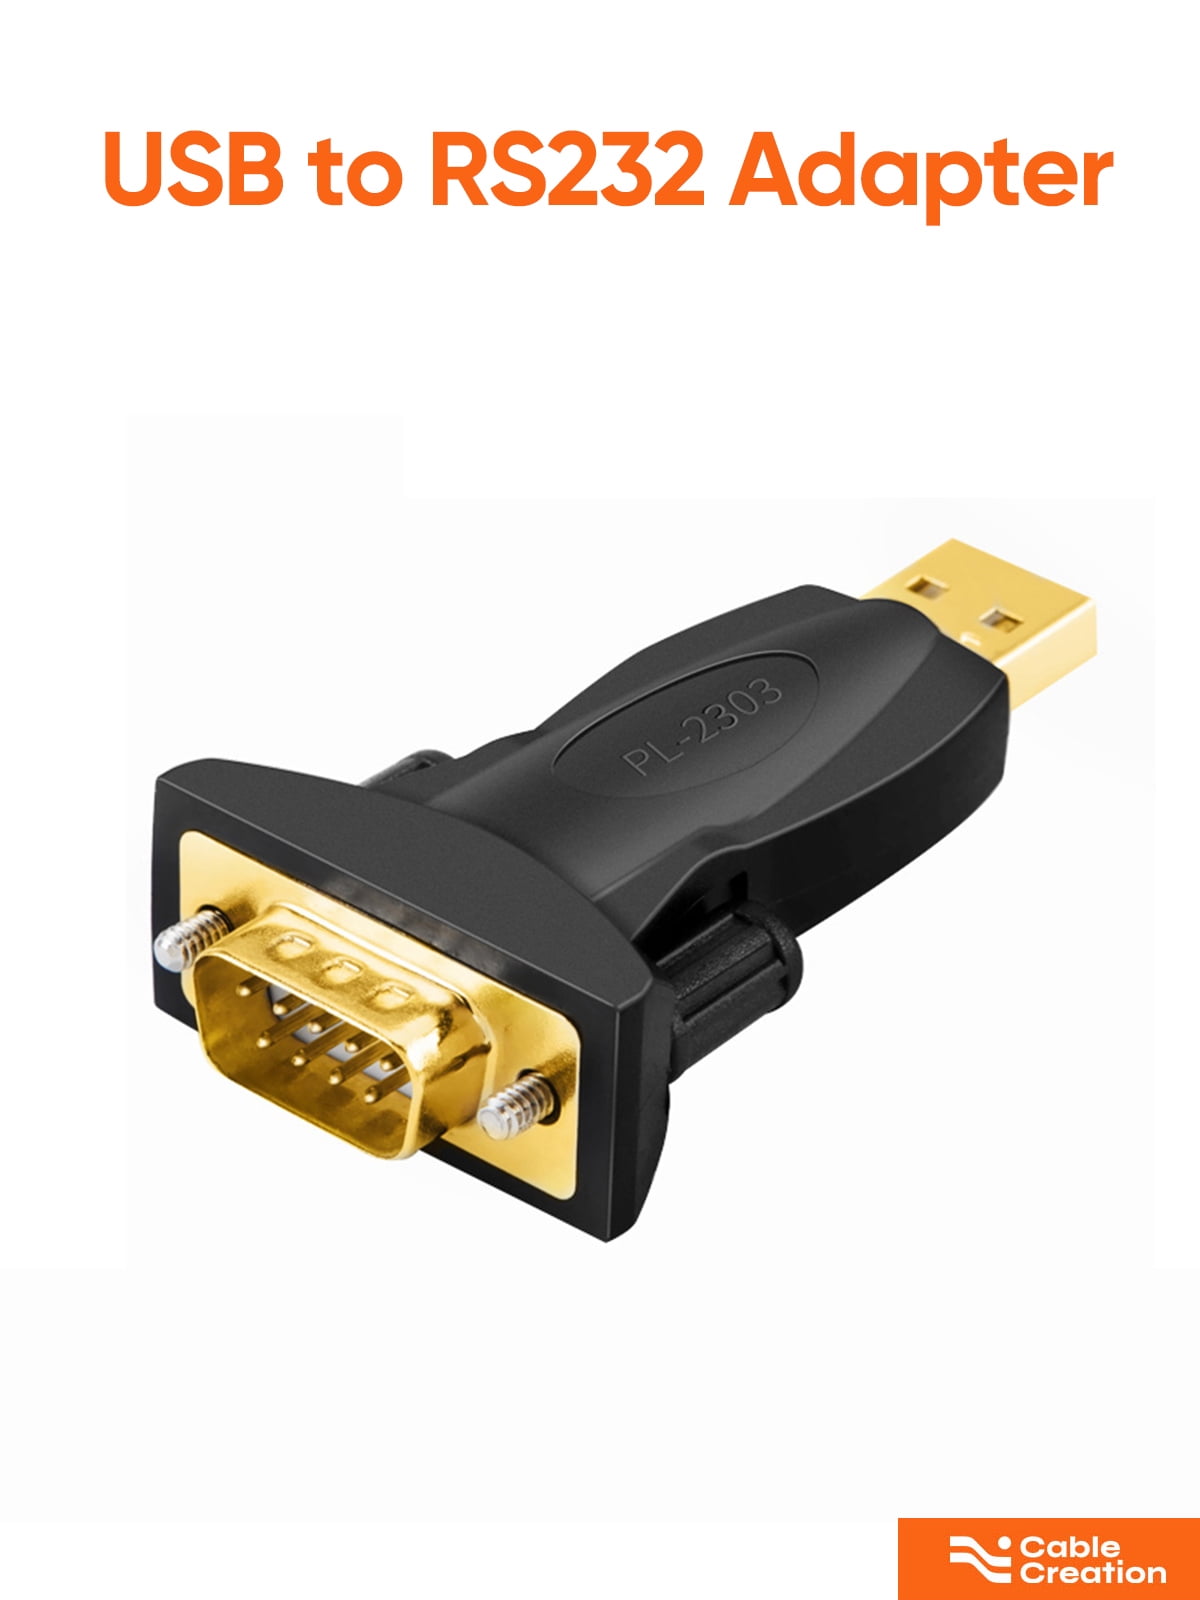 CableCreation USB to Serial Adapter, USB to RS232 USB to Converter 9-Pin FTDI Chipset for , Mac OS and Linux - Walmart.com